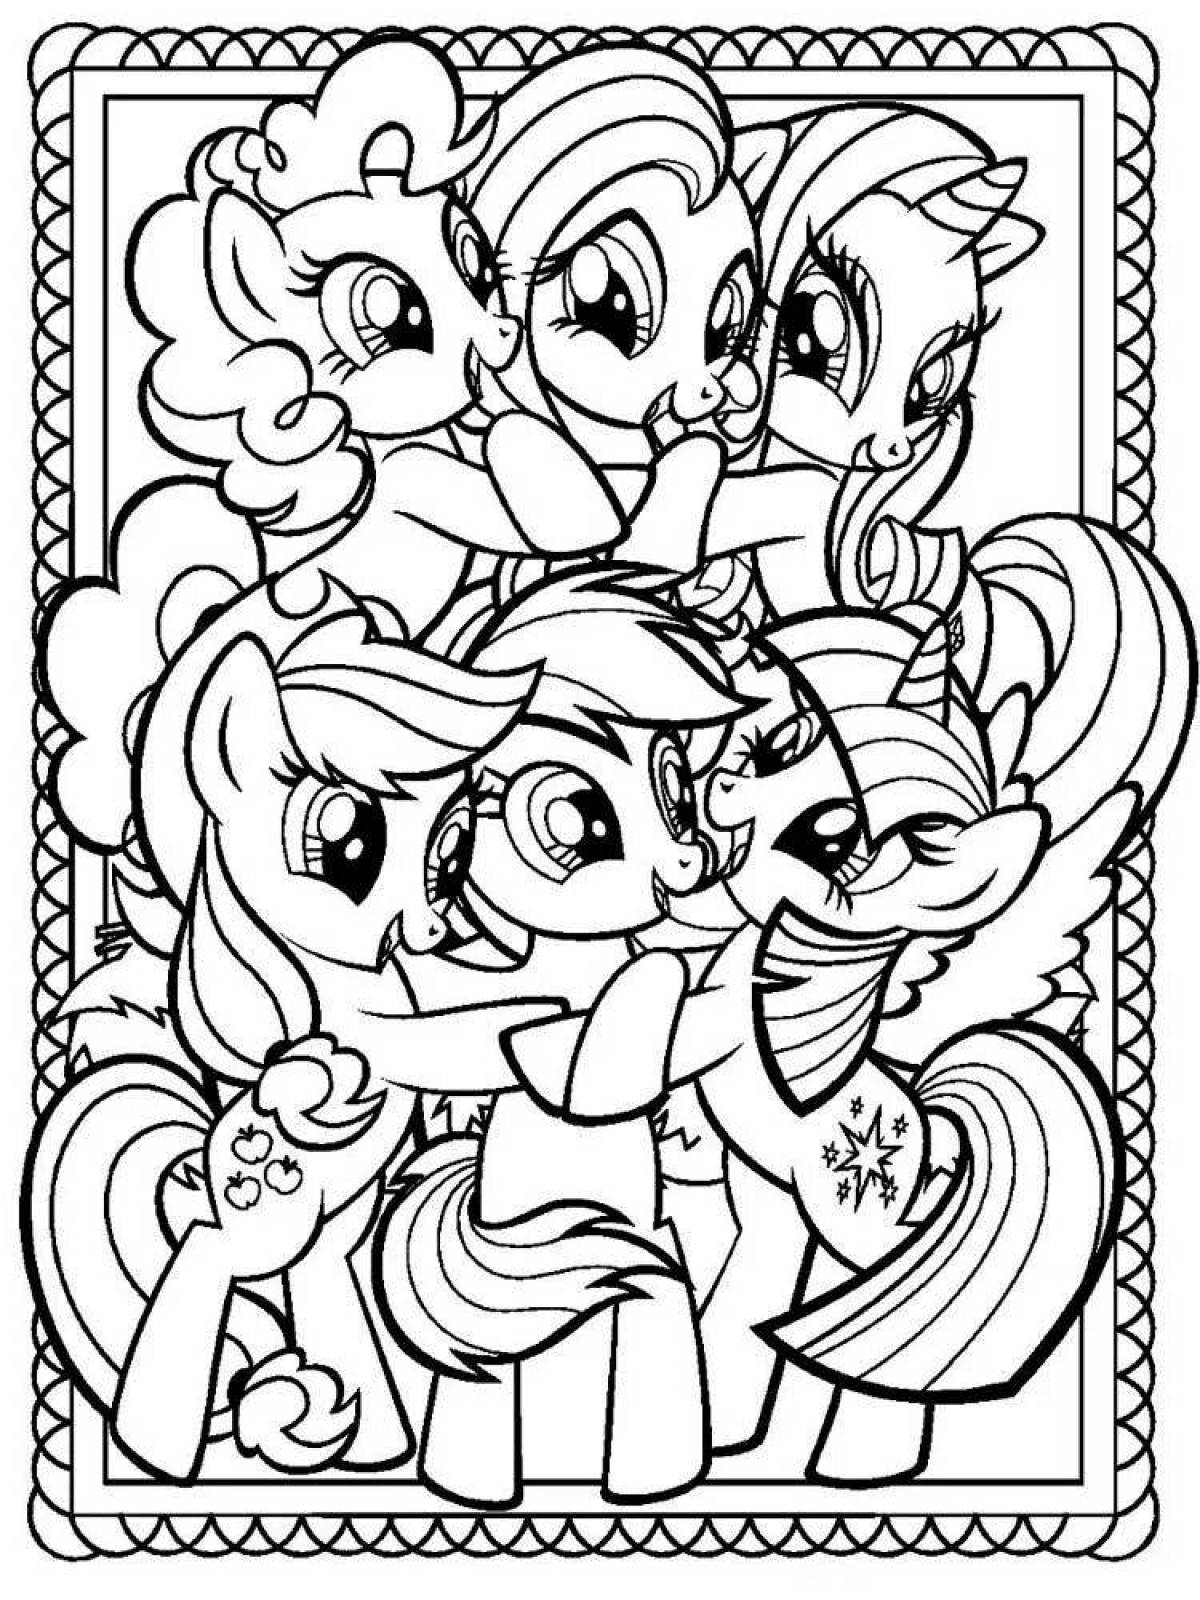 Delightful coloring of my little pony all together